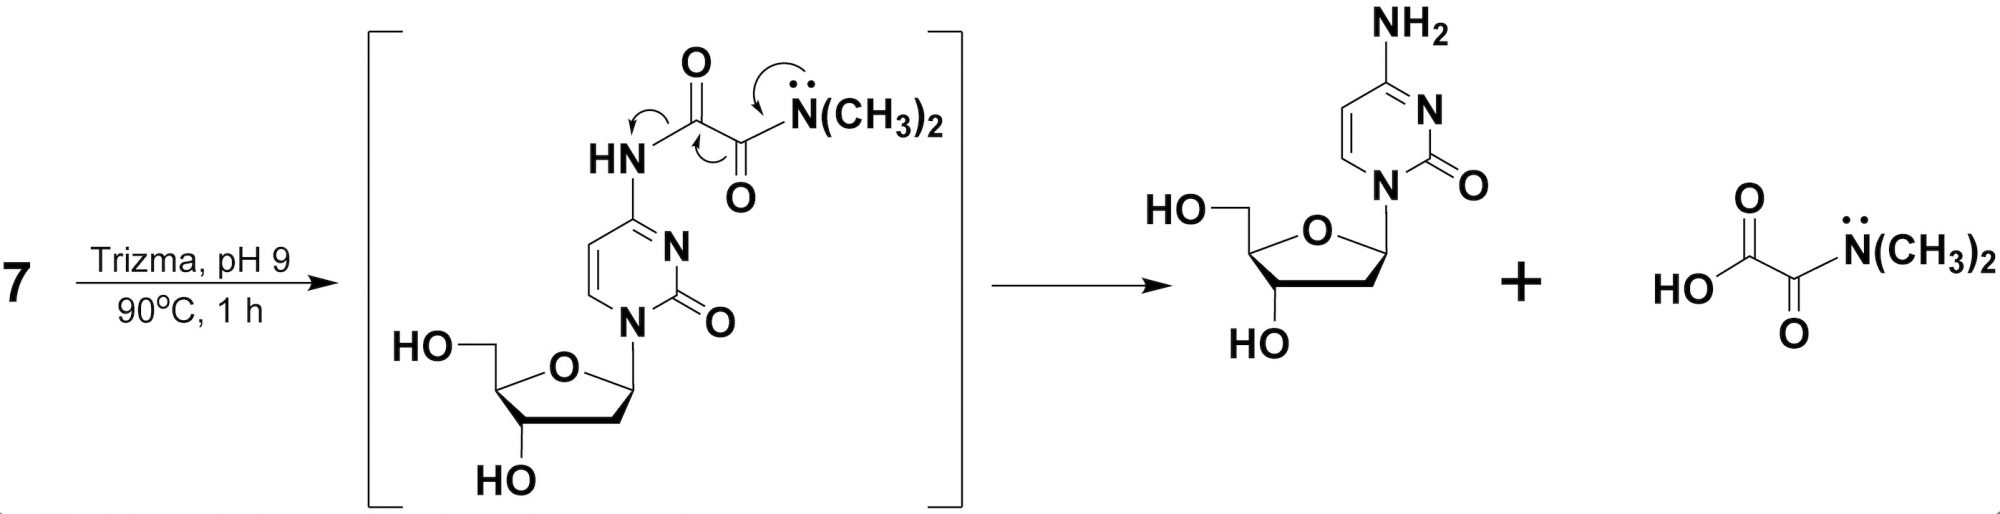 Scheme 2 depicts a proposed mechanistic pathway for the thermolytic cleavage of N, N-dimethyloxalamides, as amine protecting groups, yielding deoxycytidine, deoxyadenosine or deoxyguanosine.